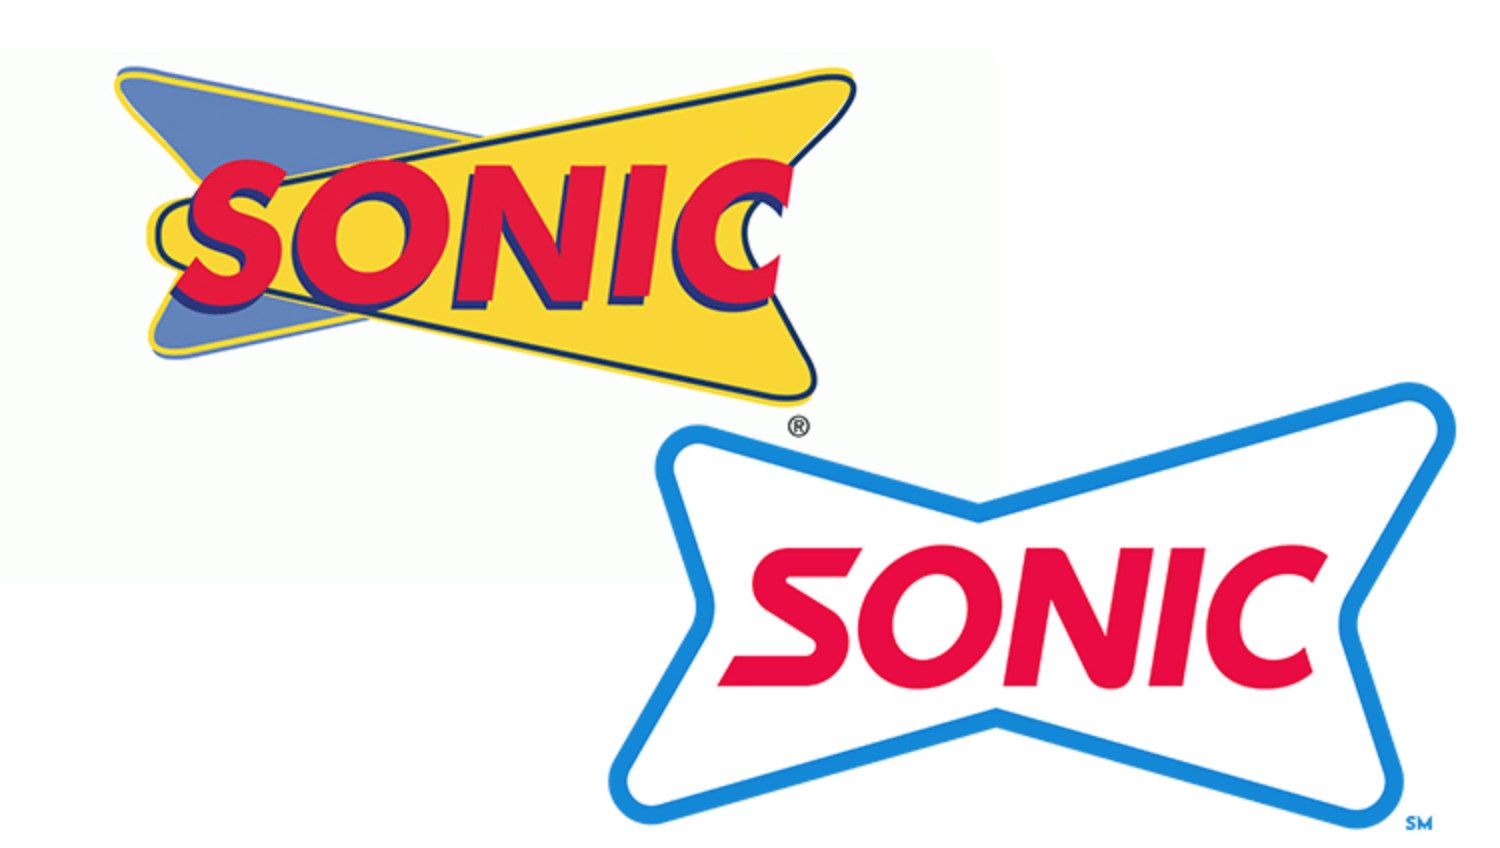 Sonic's new logo after being acquired by Inspire Brands